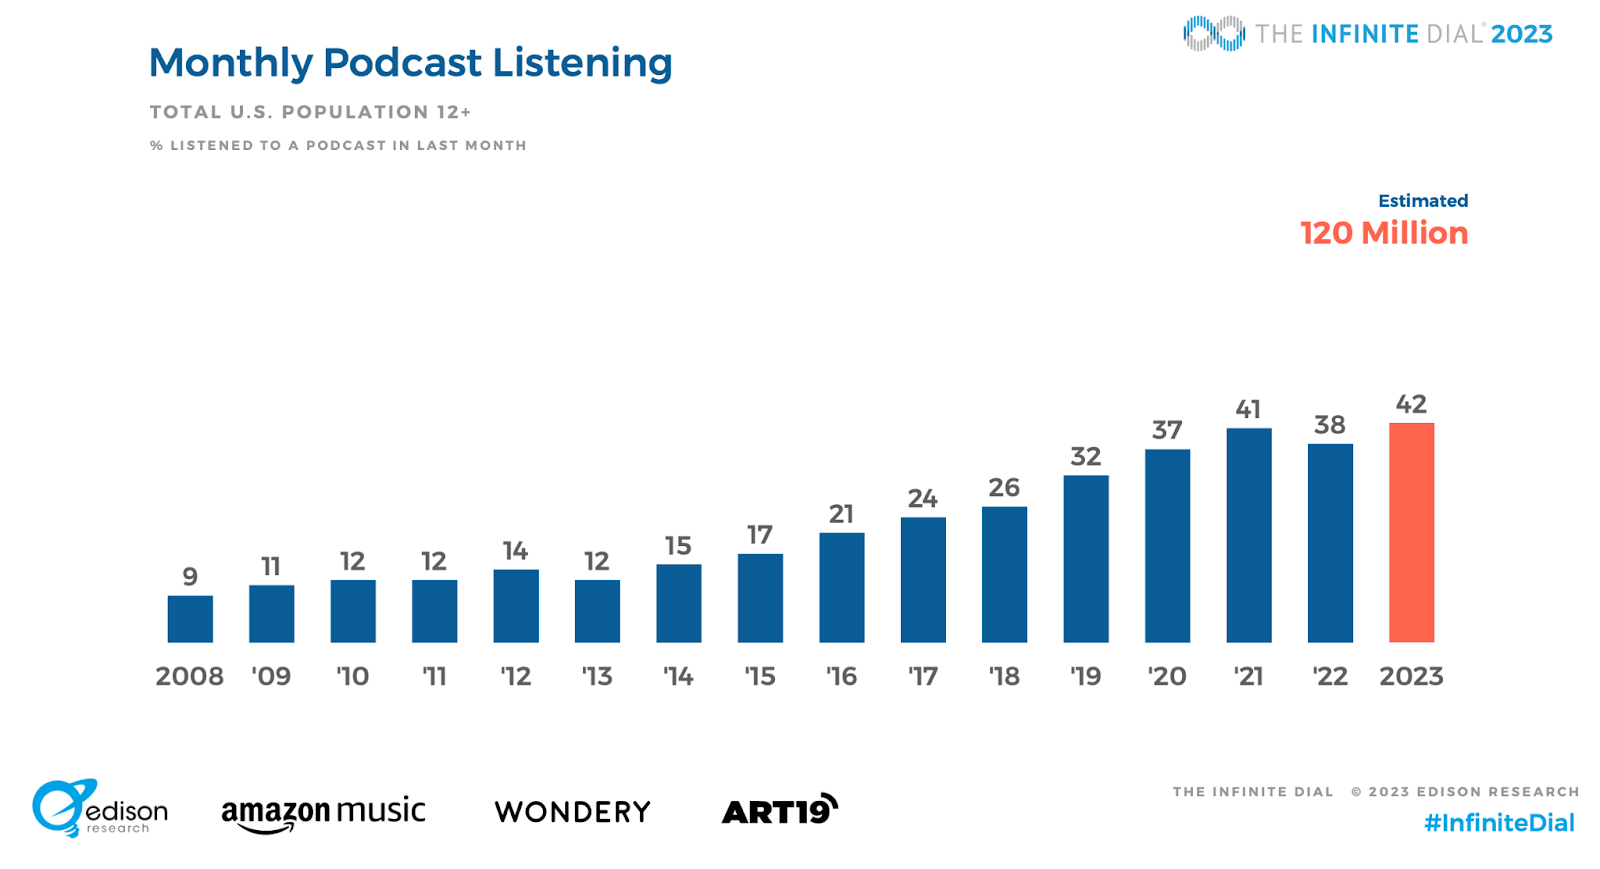 Edison Research's "Monthly podcast listening" graph